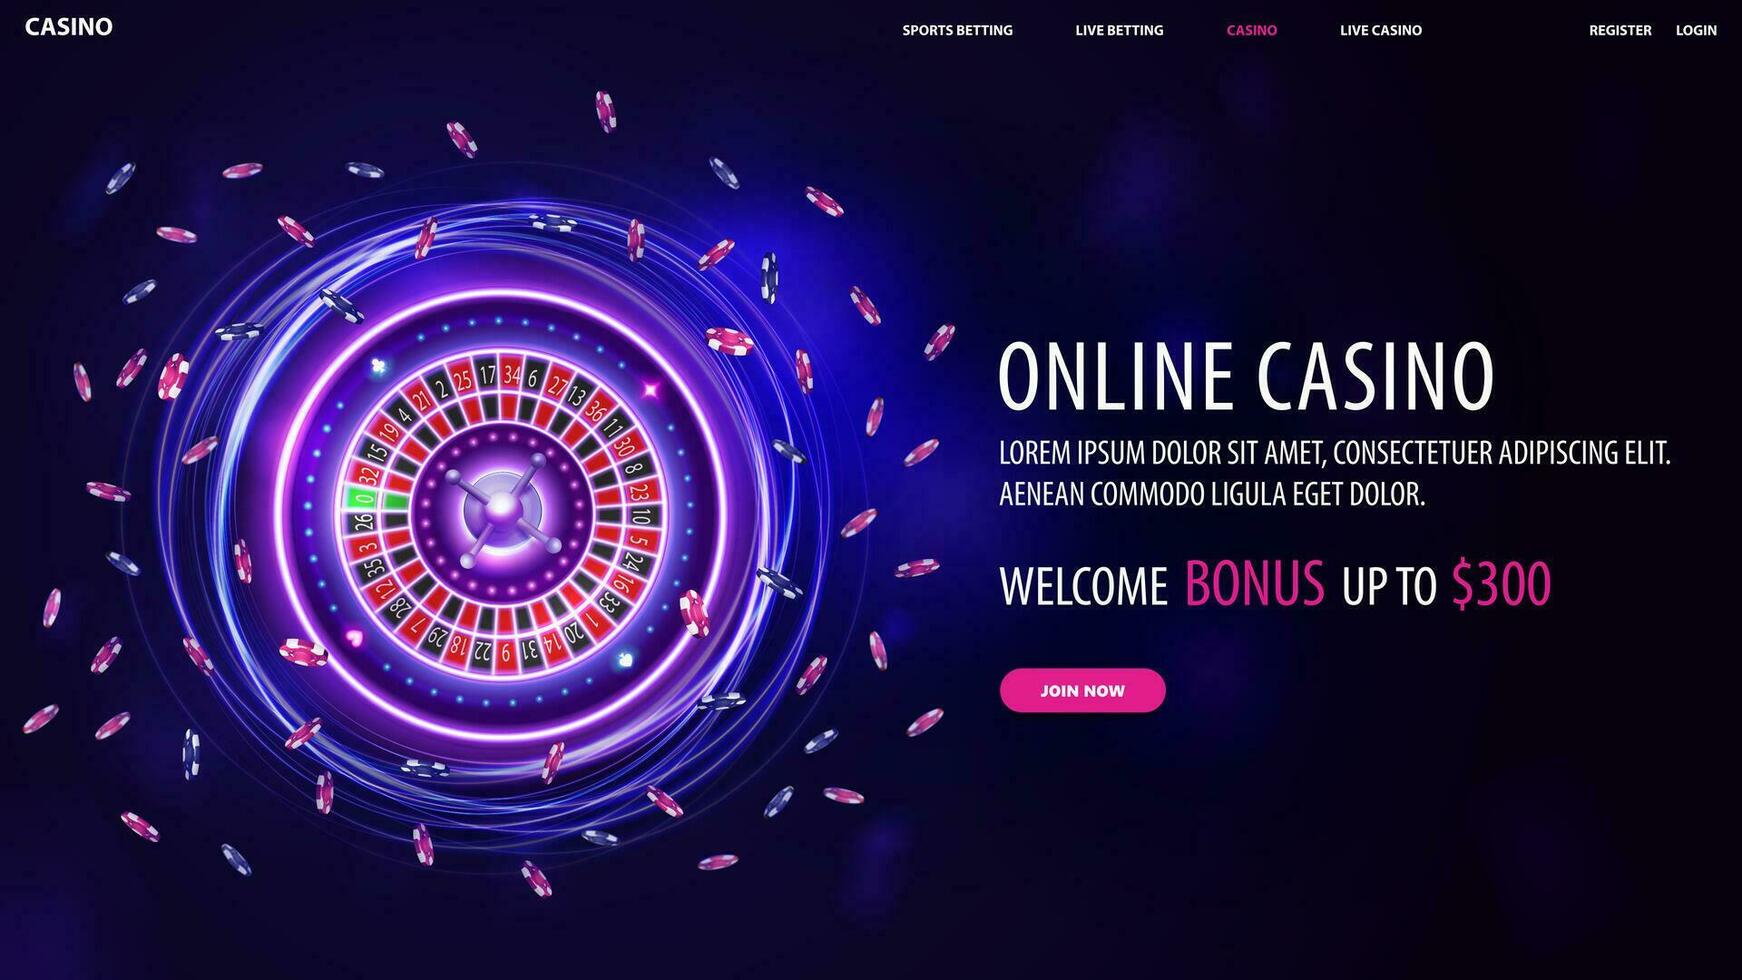 Online casino, web banner with offer, button and Pink and blue rotate neon Casino Roulette wheel with poker chips vector